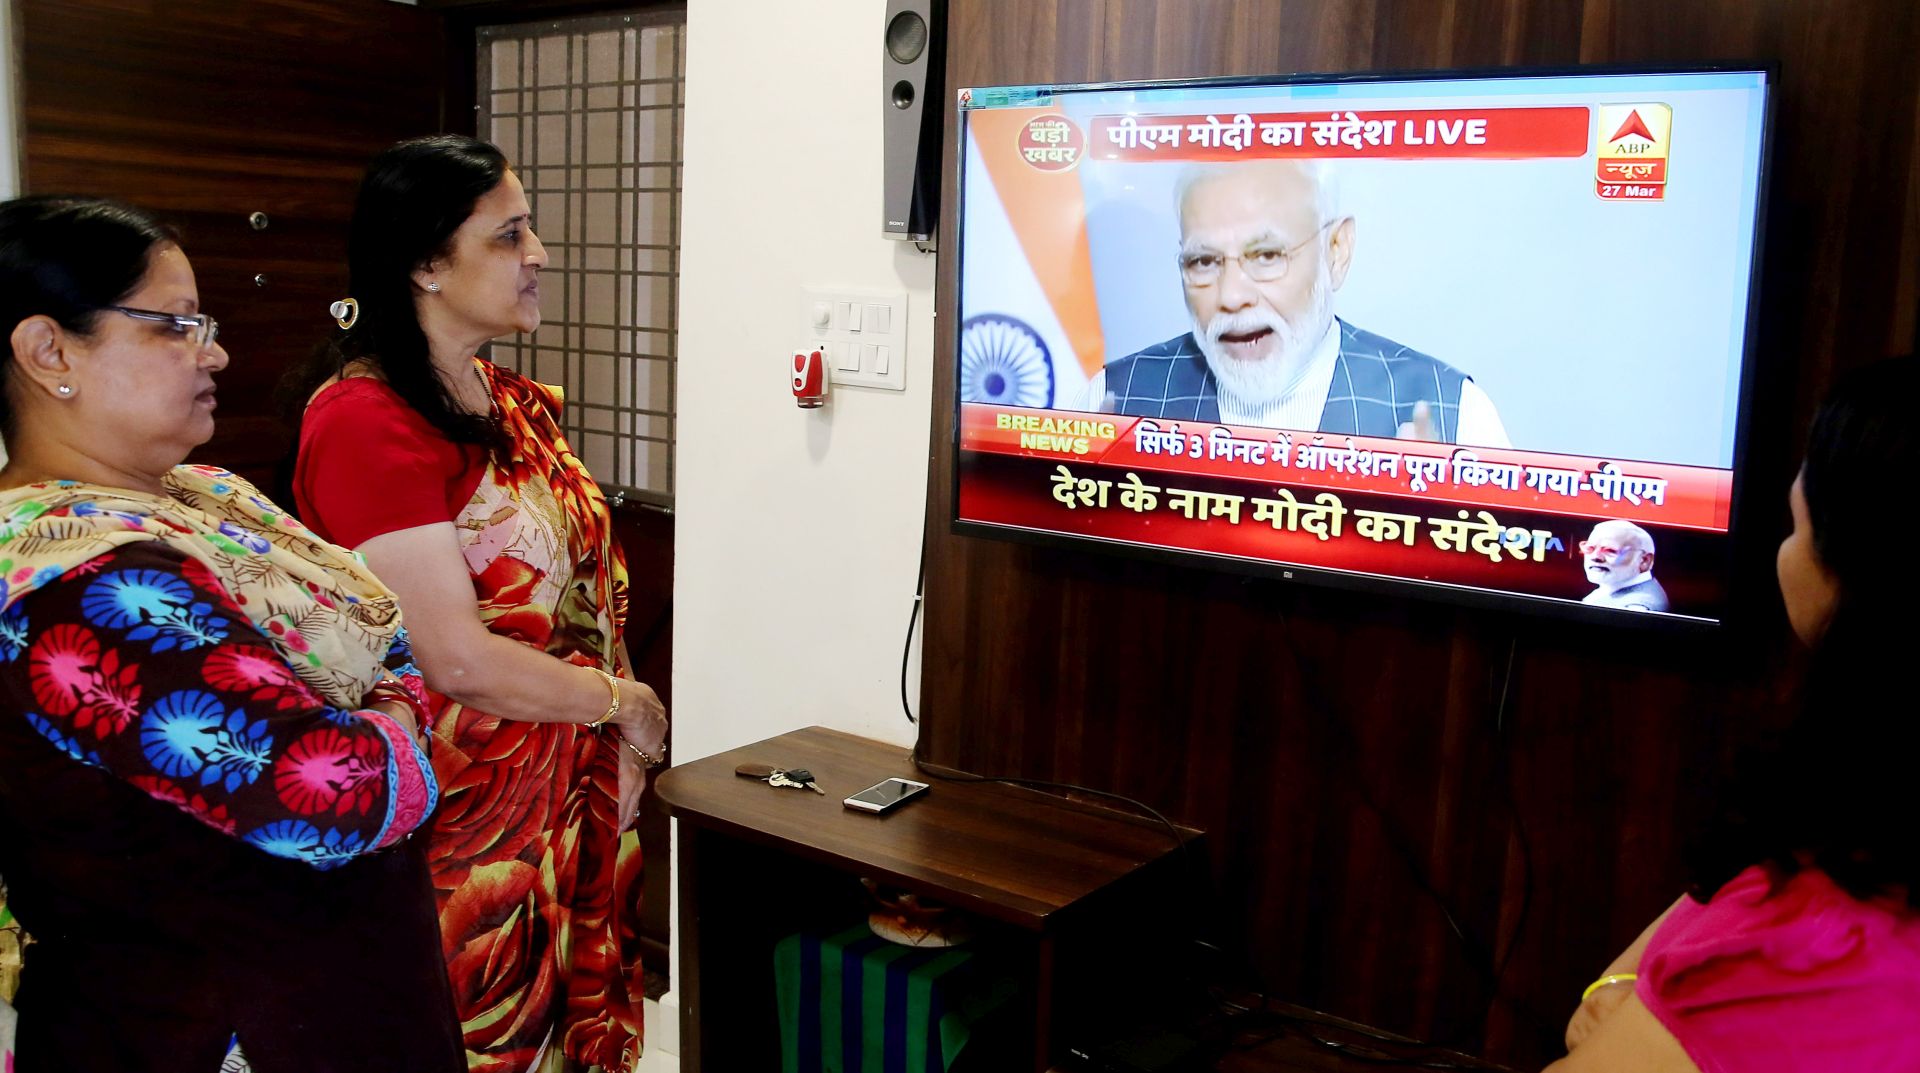 epa07466328 Indian people listen to Indian Prime Minister Narendra Modi's televised address to the nation, in Bhopal, India, 27 March 2019. In a rare address to the nation, Modi announced that Indian scientists conducted Mission Shakti, an anti-satellite missile test that shot down a live satellite at a low-earth orbit. India has entered its name as an elite space power after Indian Space Research Organisation (ISRO) scientists, using an indigenously built anti-satellite missile, successfully shot down a satellite operating in lower orbit.  EPA/SANJEEV GUPTA